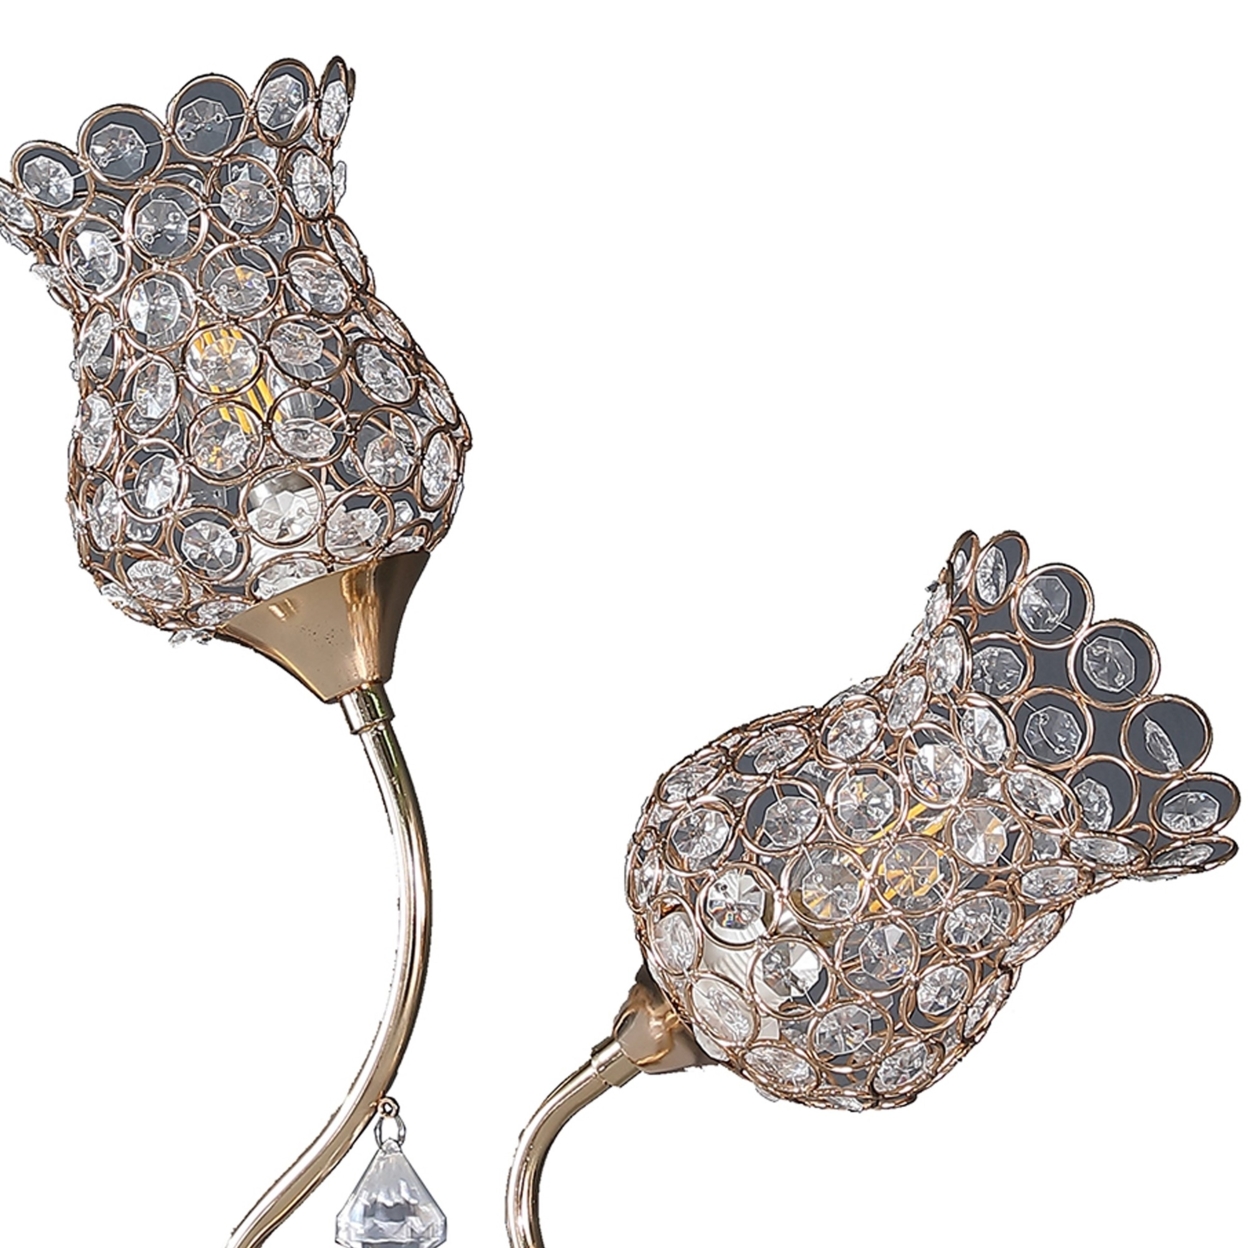 Metal Table Lamp With Floral Trumpet Shade And Crystal Accents, Gold- Saltoro Sherpi